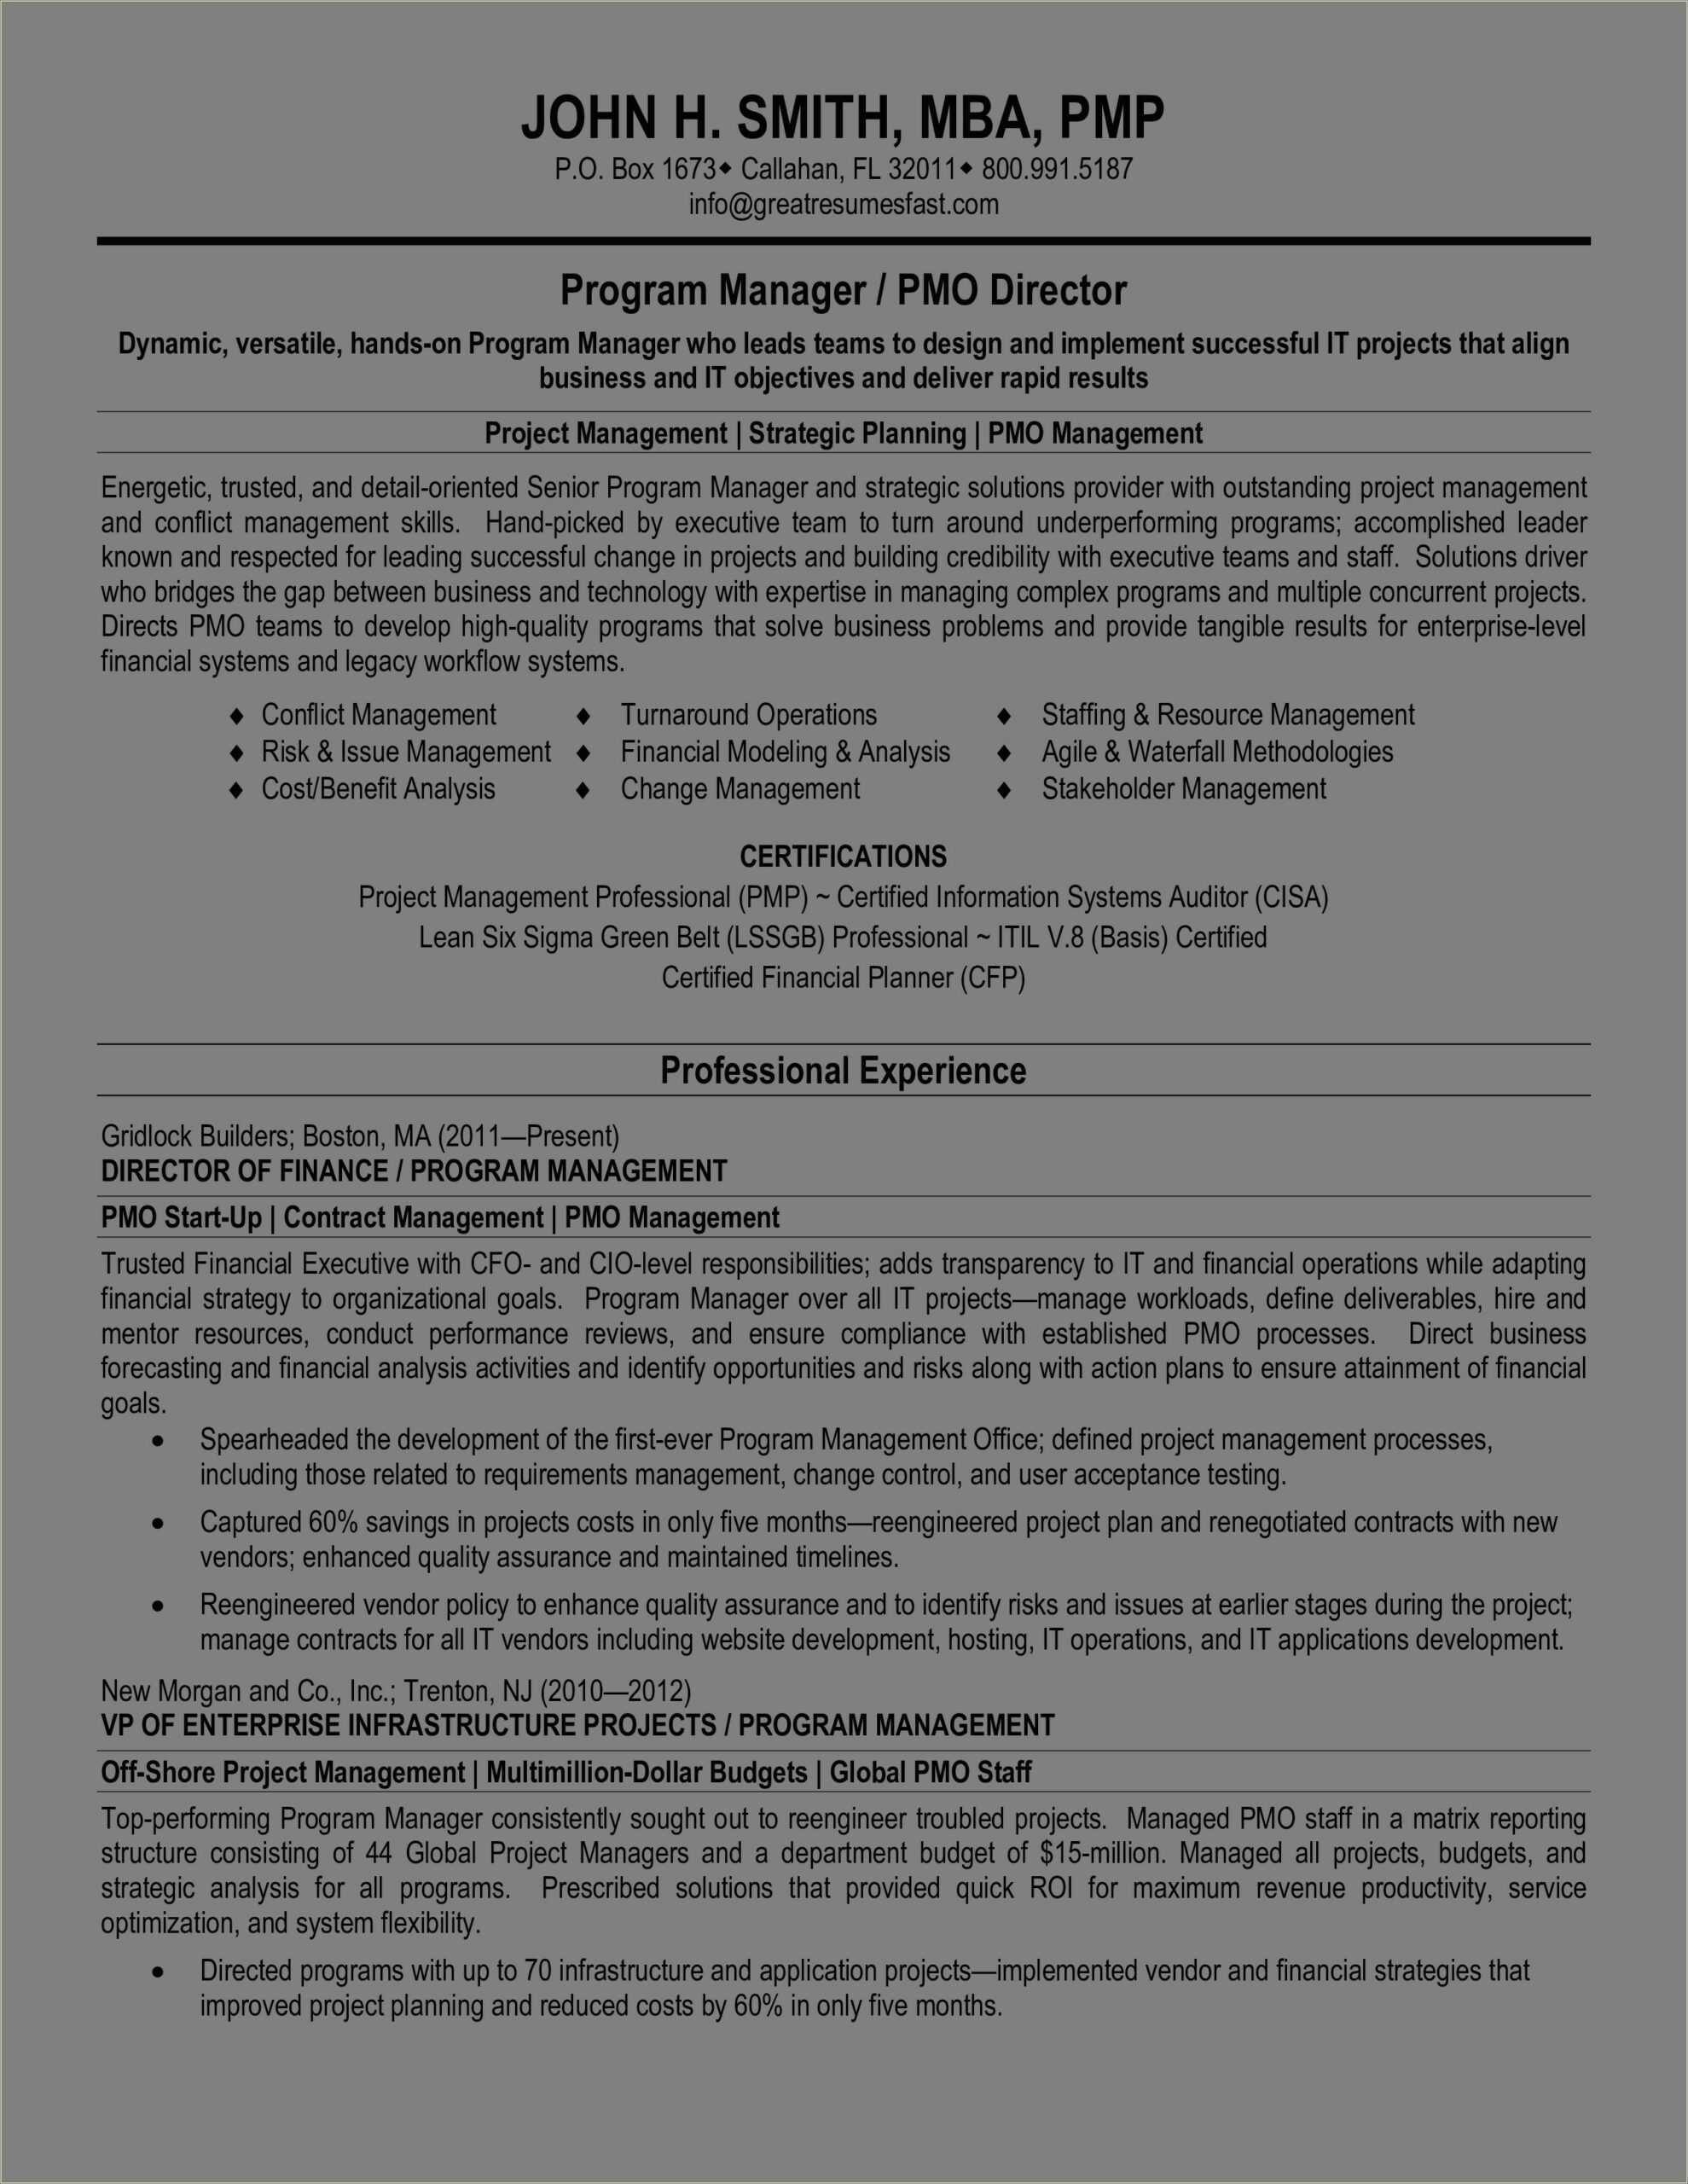 Professional Resume For A Program Manager